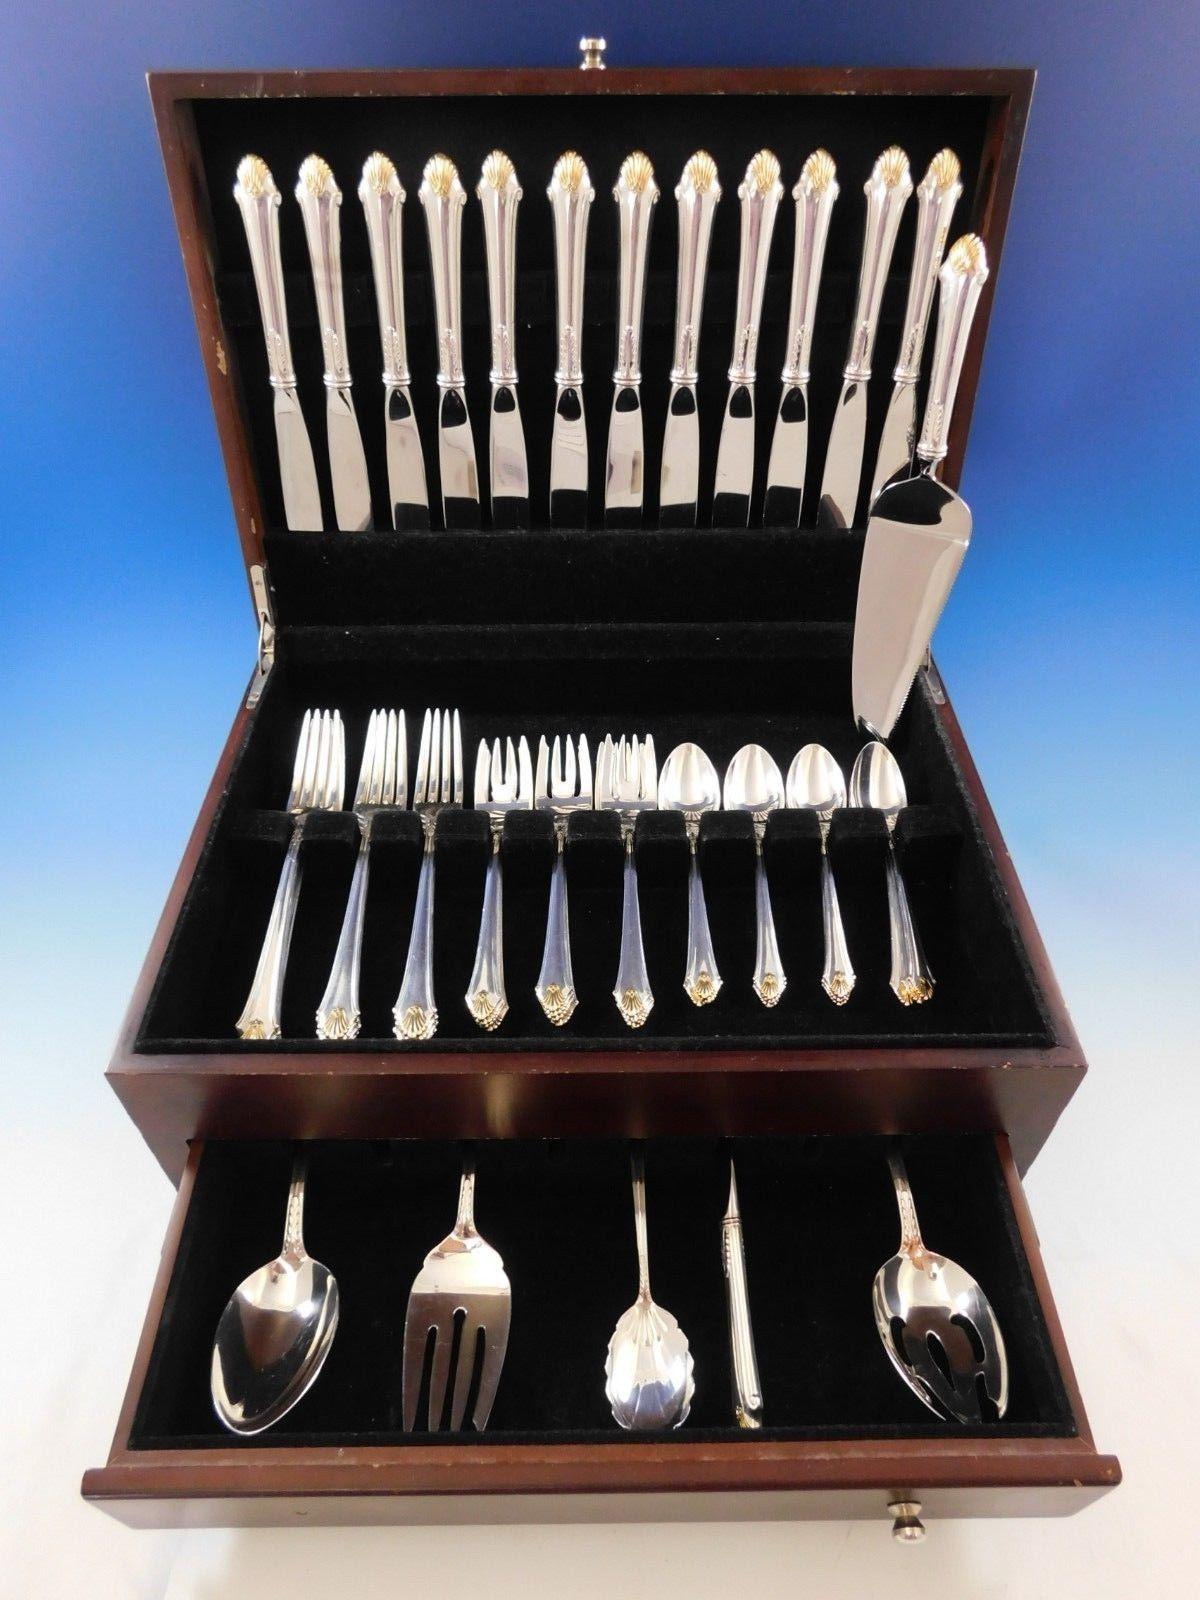 Edgemont gold by Gorham sterling silver flatware set - 54 pieces. This set includes:

12 knives, 9 1/4